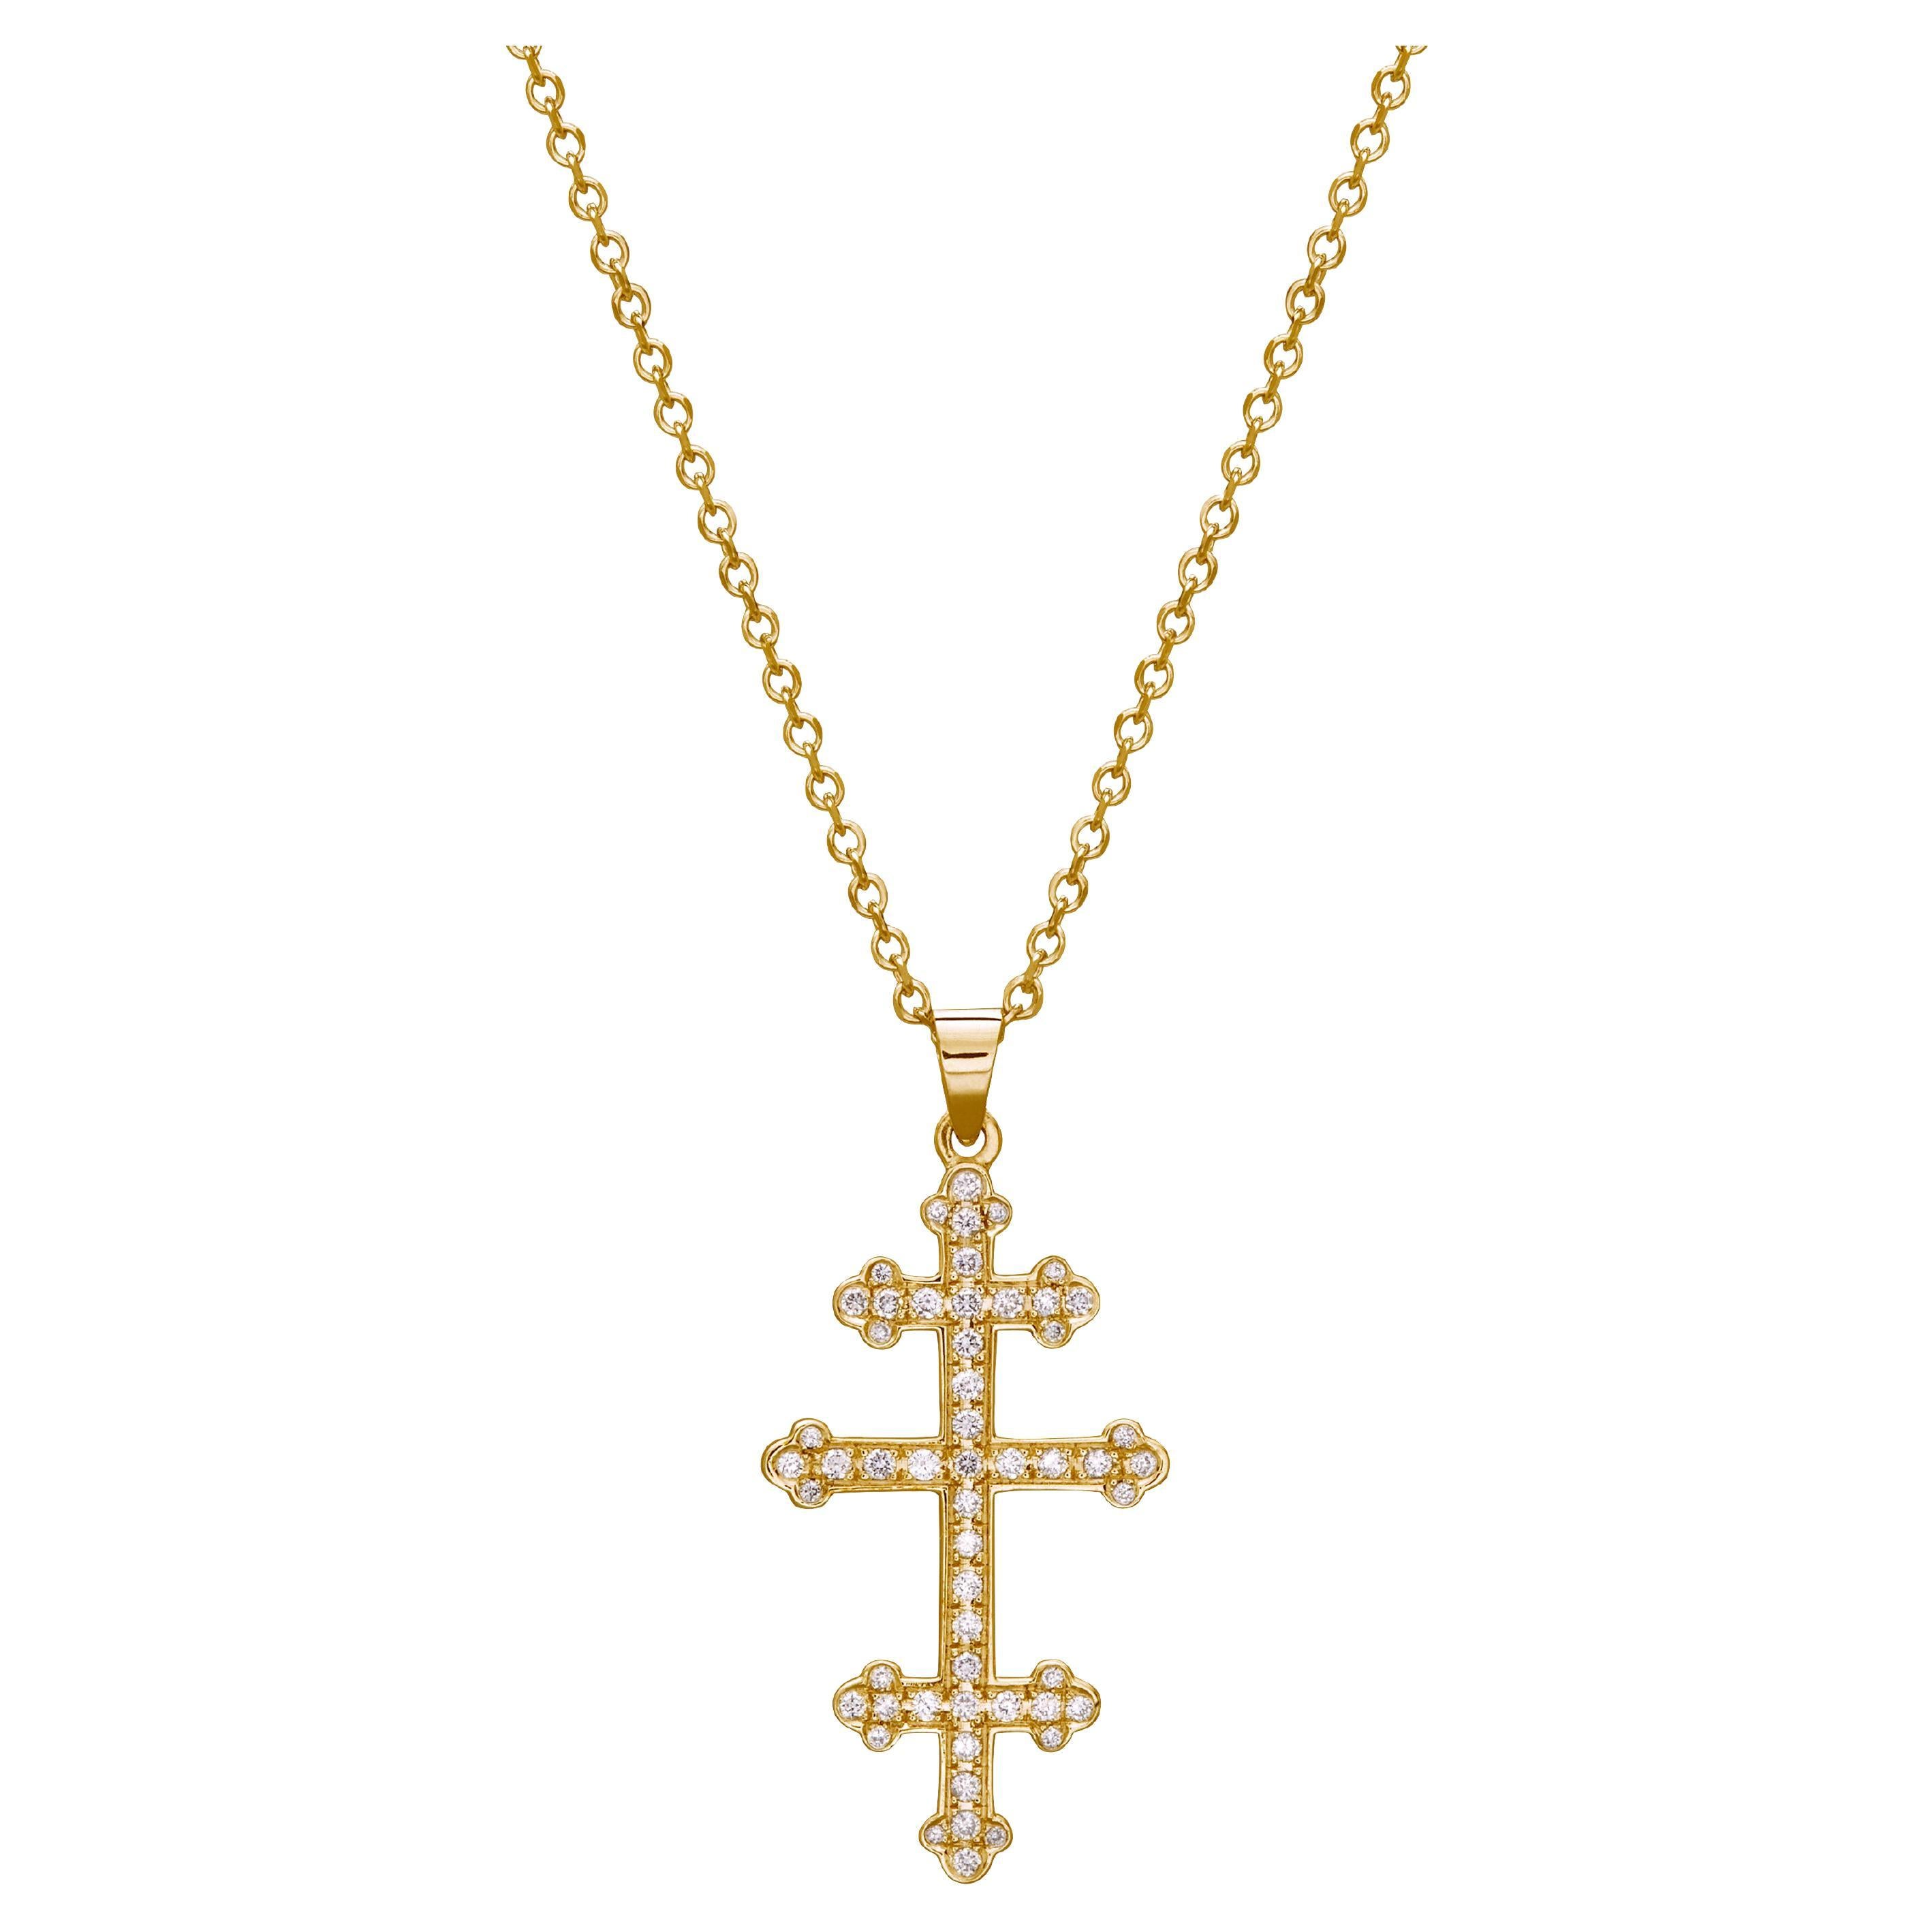 Pope's Cross Pendant Necklace in 18Kt Yellow Gold with Pave Diamonds GMCKS